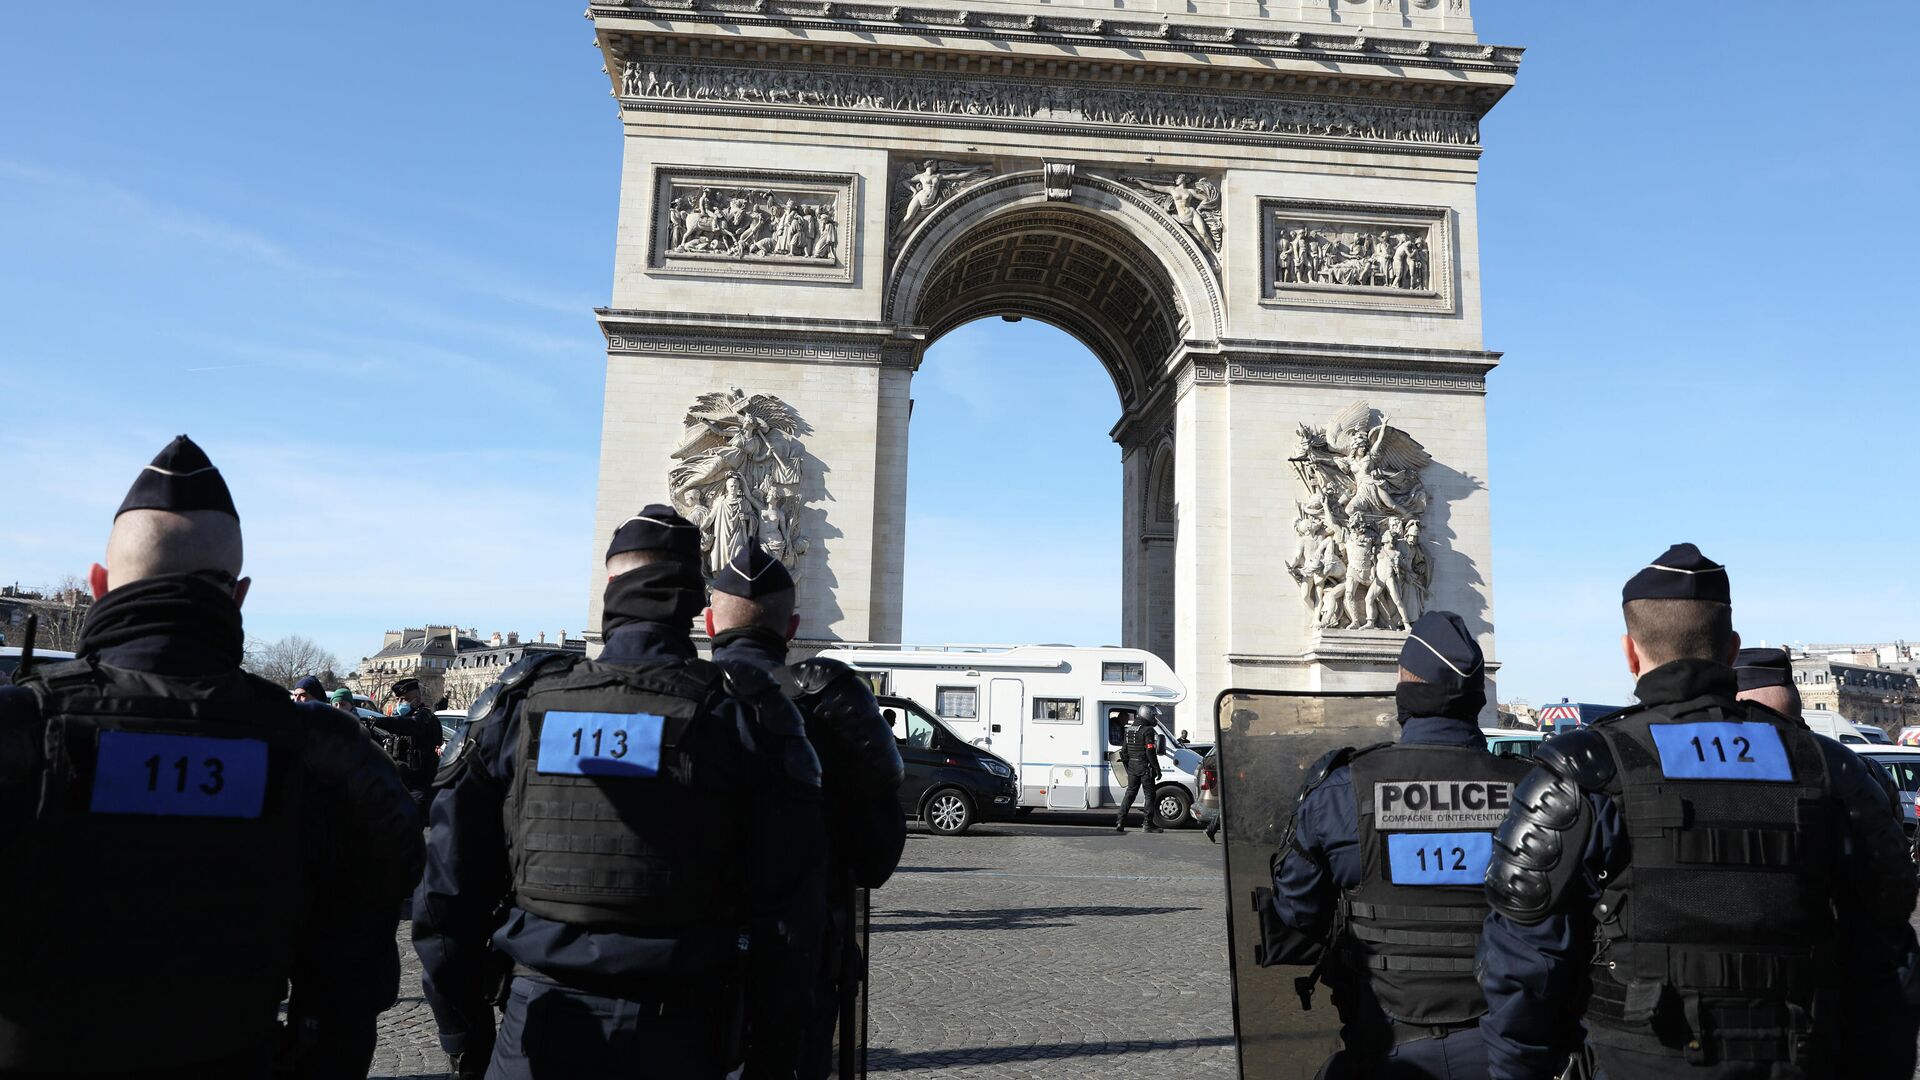 A camper van part of a convoy drives past the Arc de Triomphe on the Champs-Elysees avenue as police officers stand guard, Saturday, Feb.12, 2022 in Paris. Paris police intercepted at least 500 vehicles attempting to enter the French capital in defiance of a police order to take part in protests against virus restrictions inspired by the Canada's horn-honking Freedom Convoy.  - Sputnik International, 1920, 02.07.2023